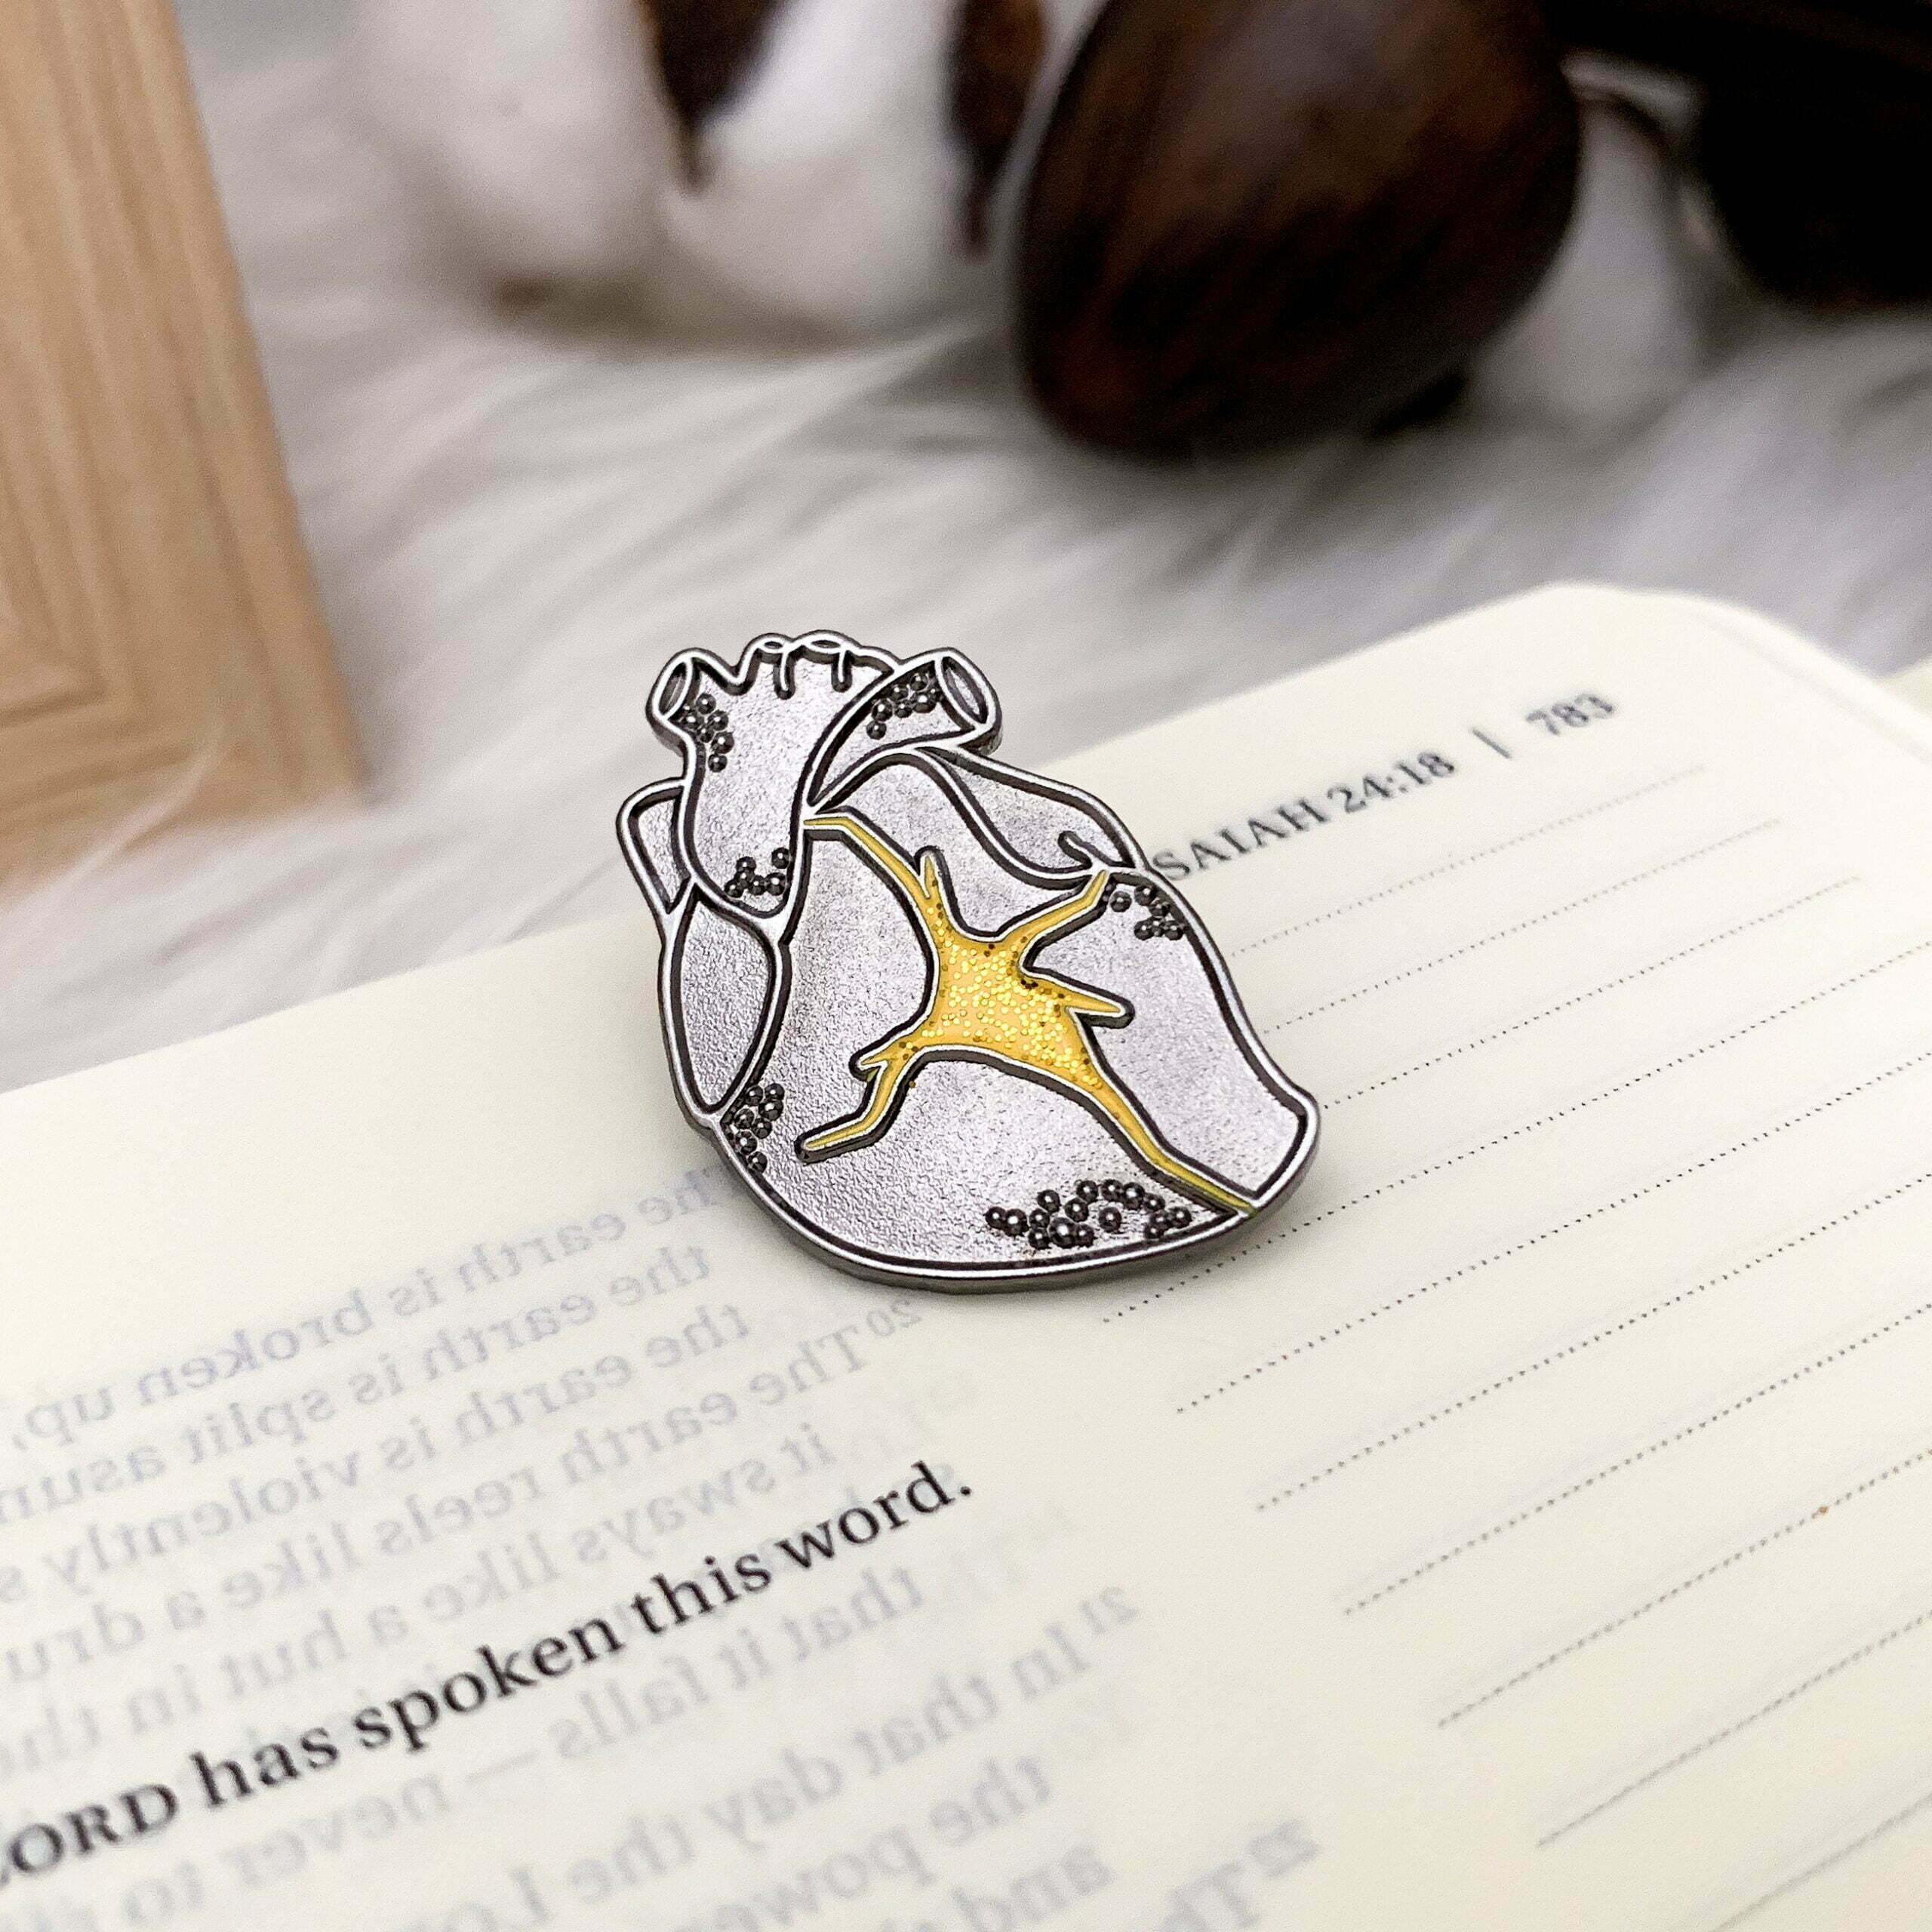 Soft Enamel Pin, Silver Plated with Recessed Metal & Enamel Glitter Fill